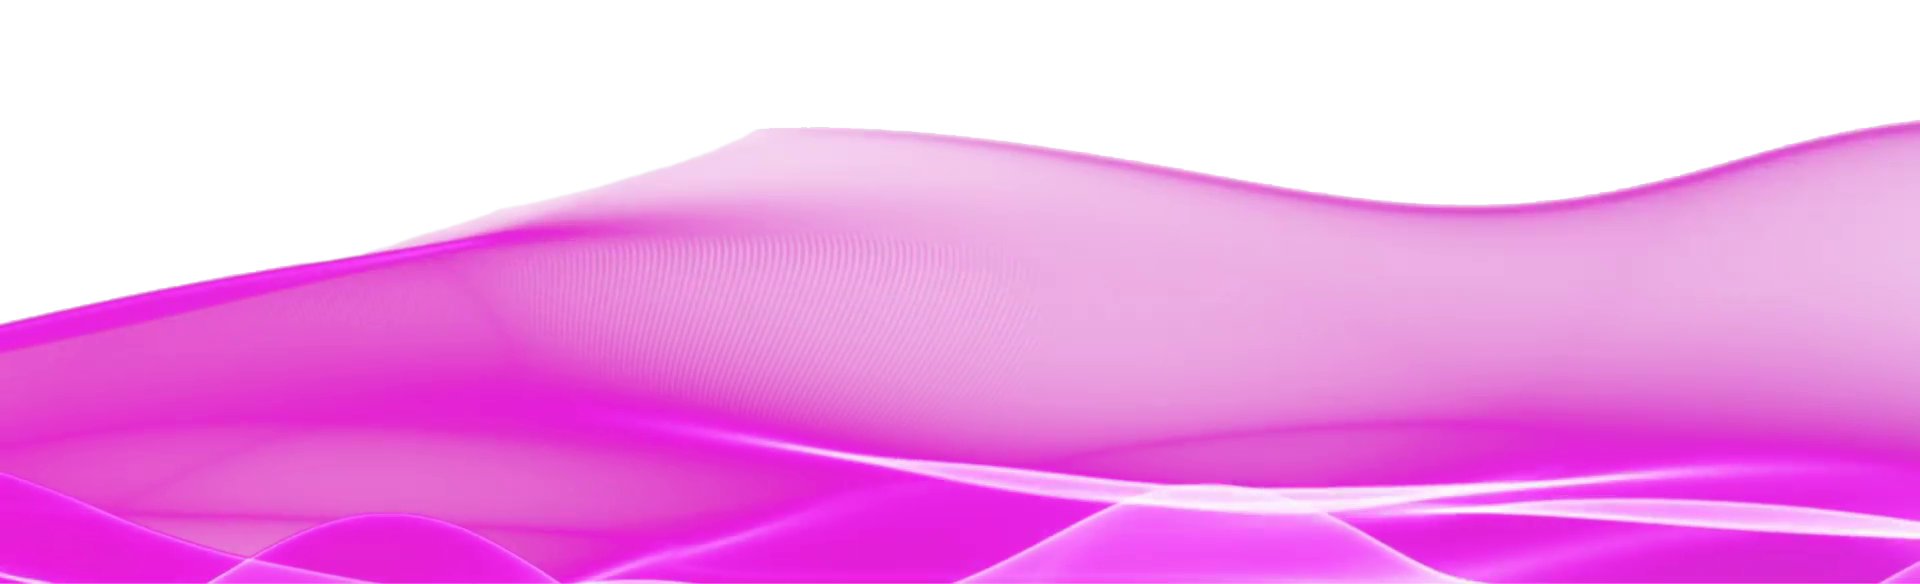 Download PNG image - Pink Wave PNG HD 